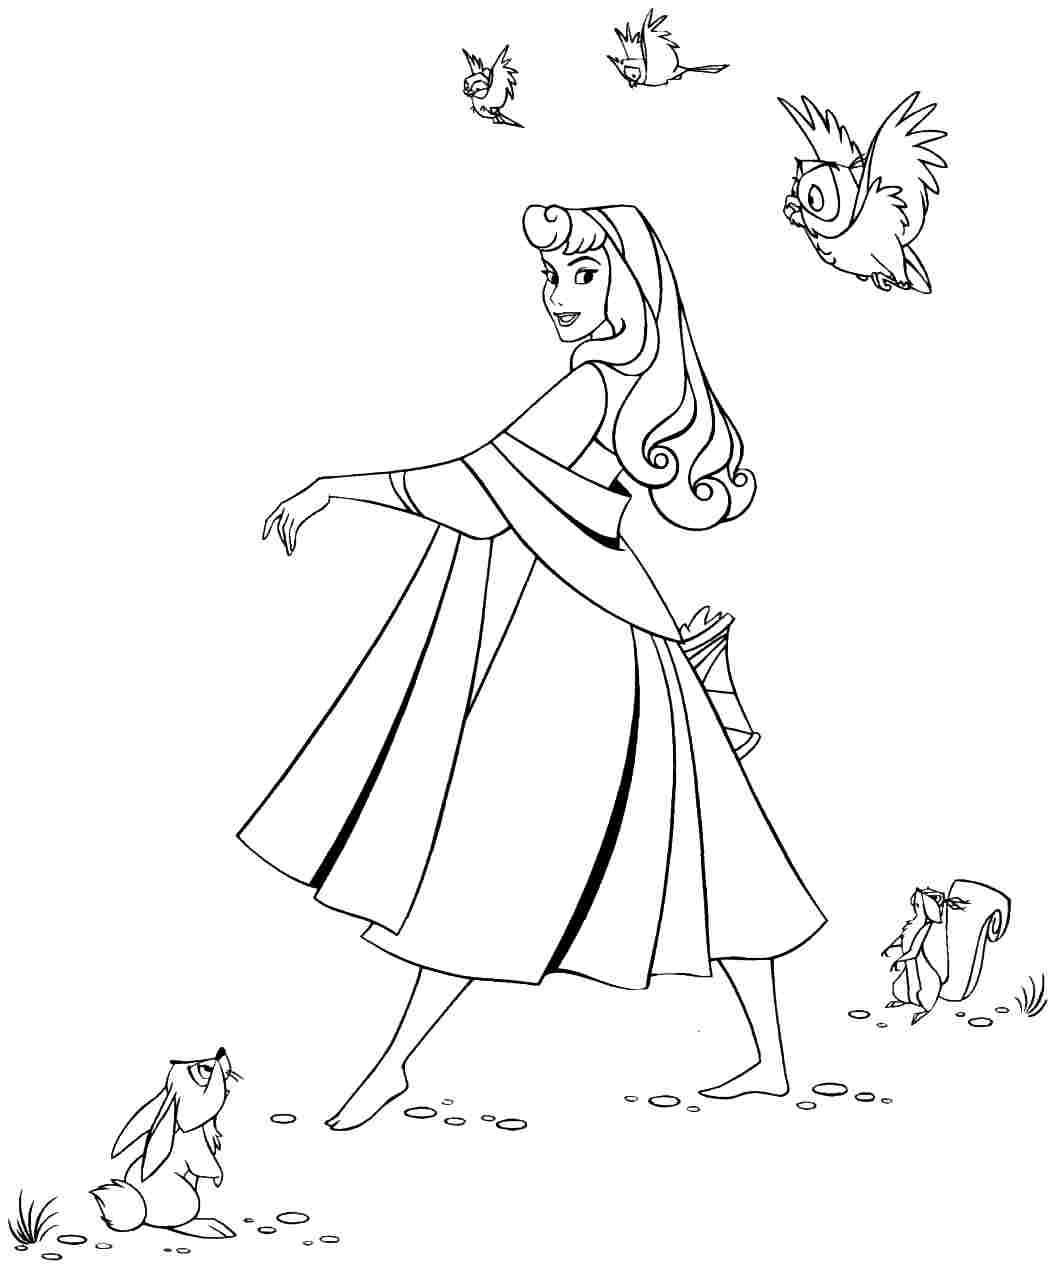 Free Printable Sleeping Beauty Coloring Pages For Kids